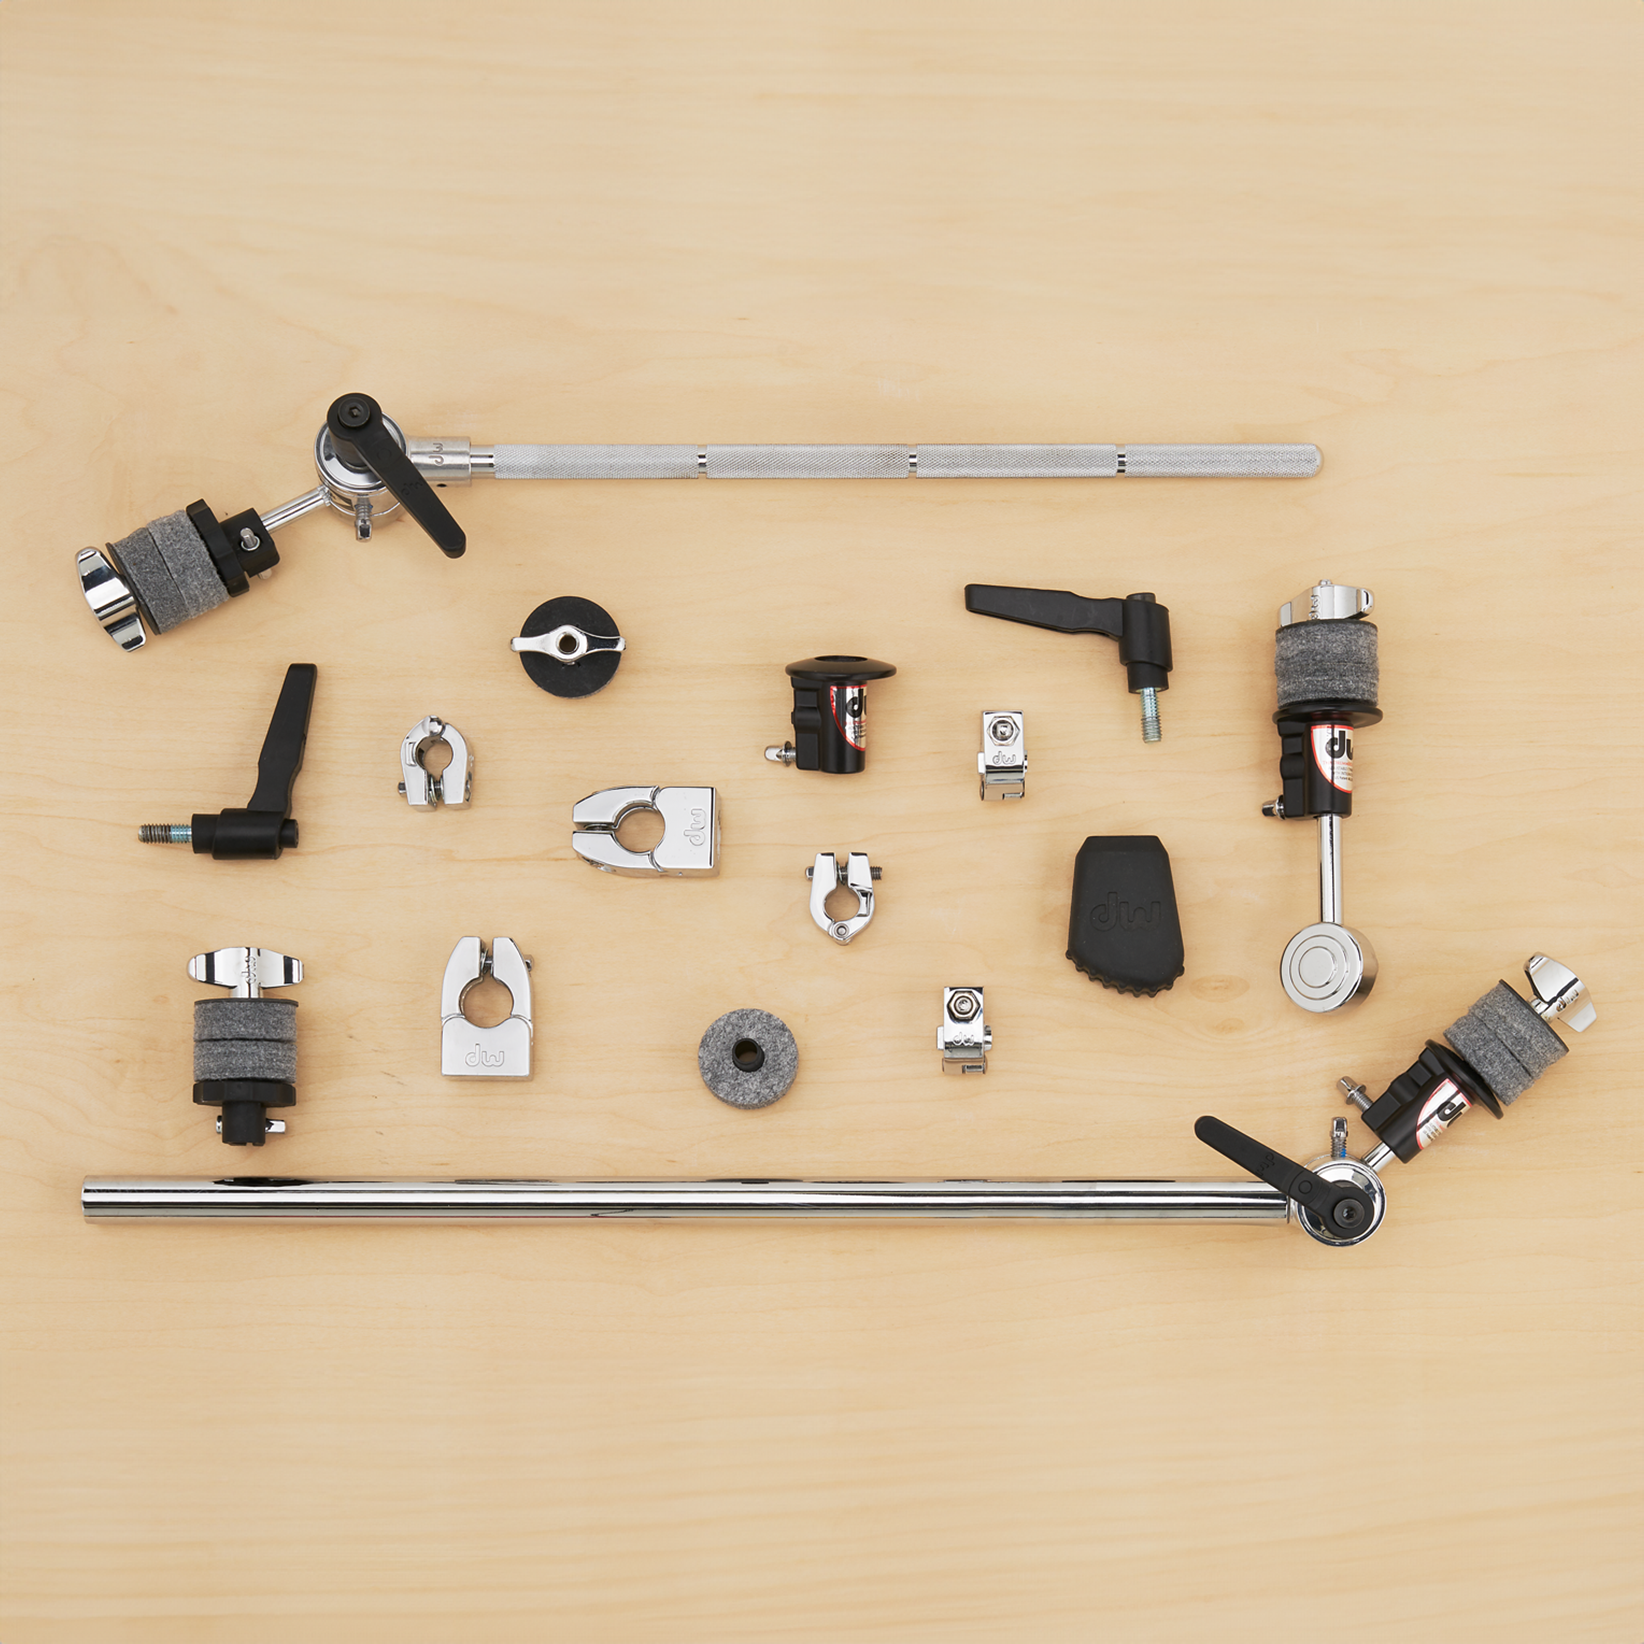 This collection of DW cymbal stand parts includes toothless tilters, tubing, memory locks, felts, replacement feet, and more.